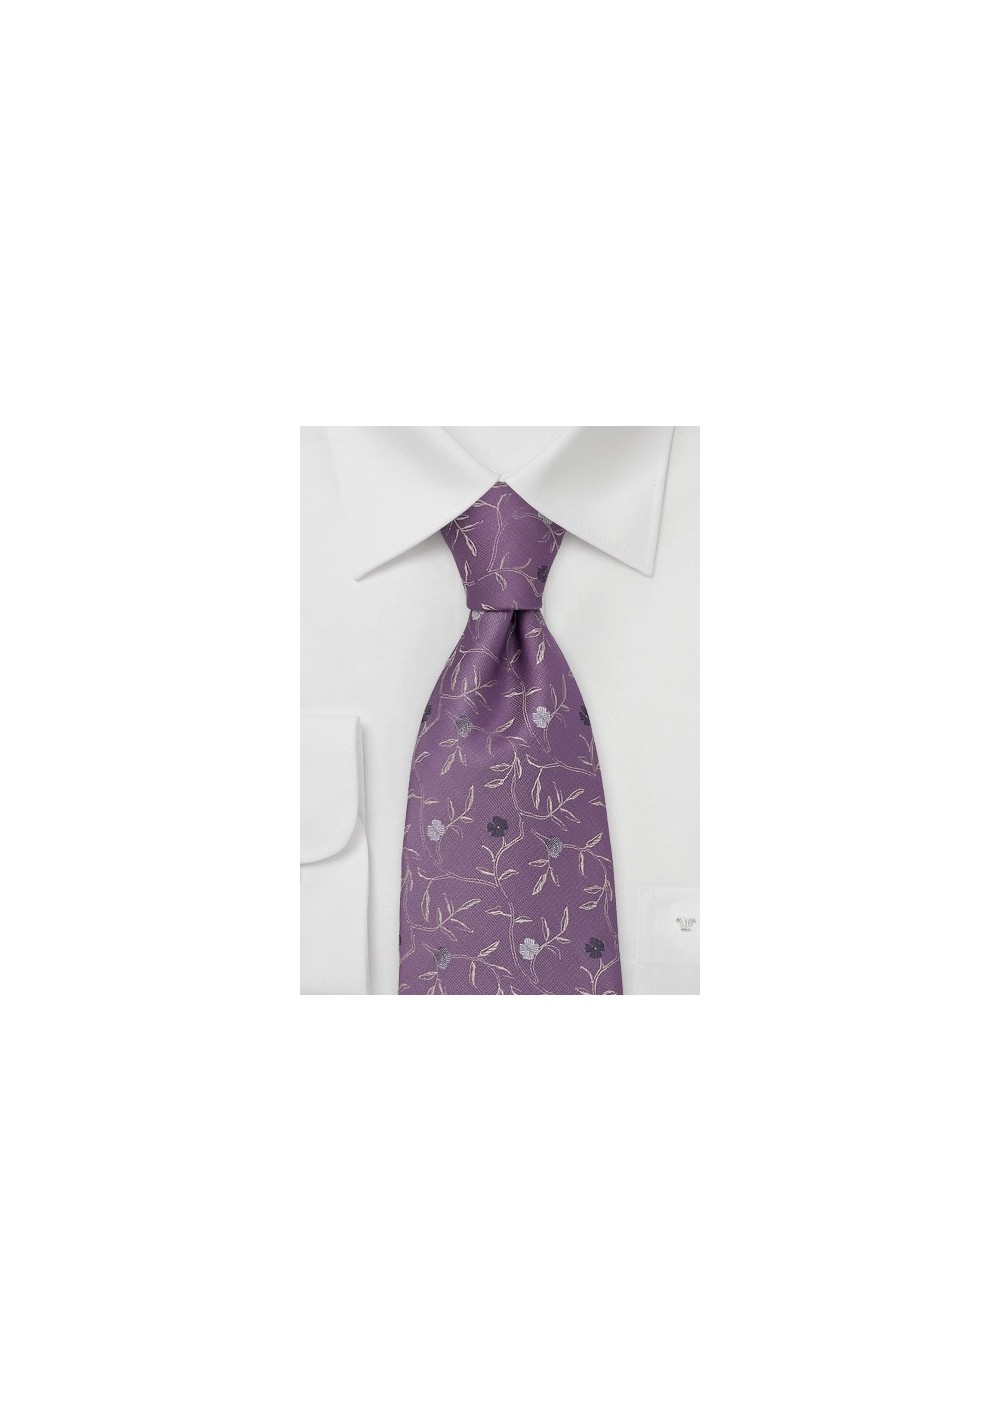 Floral Tie in Lavender by Chevalier